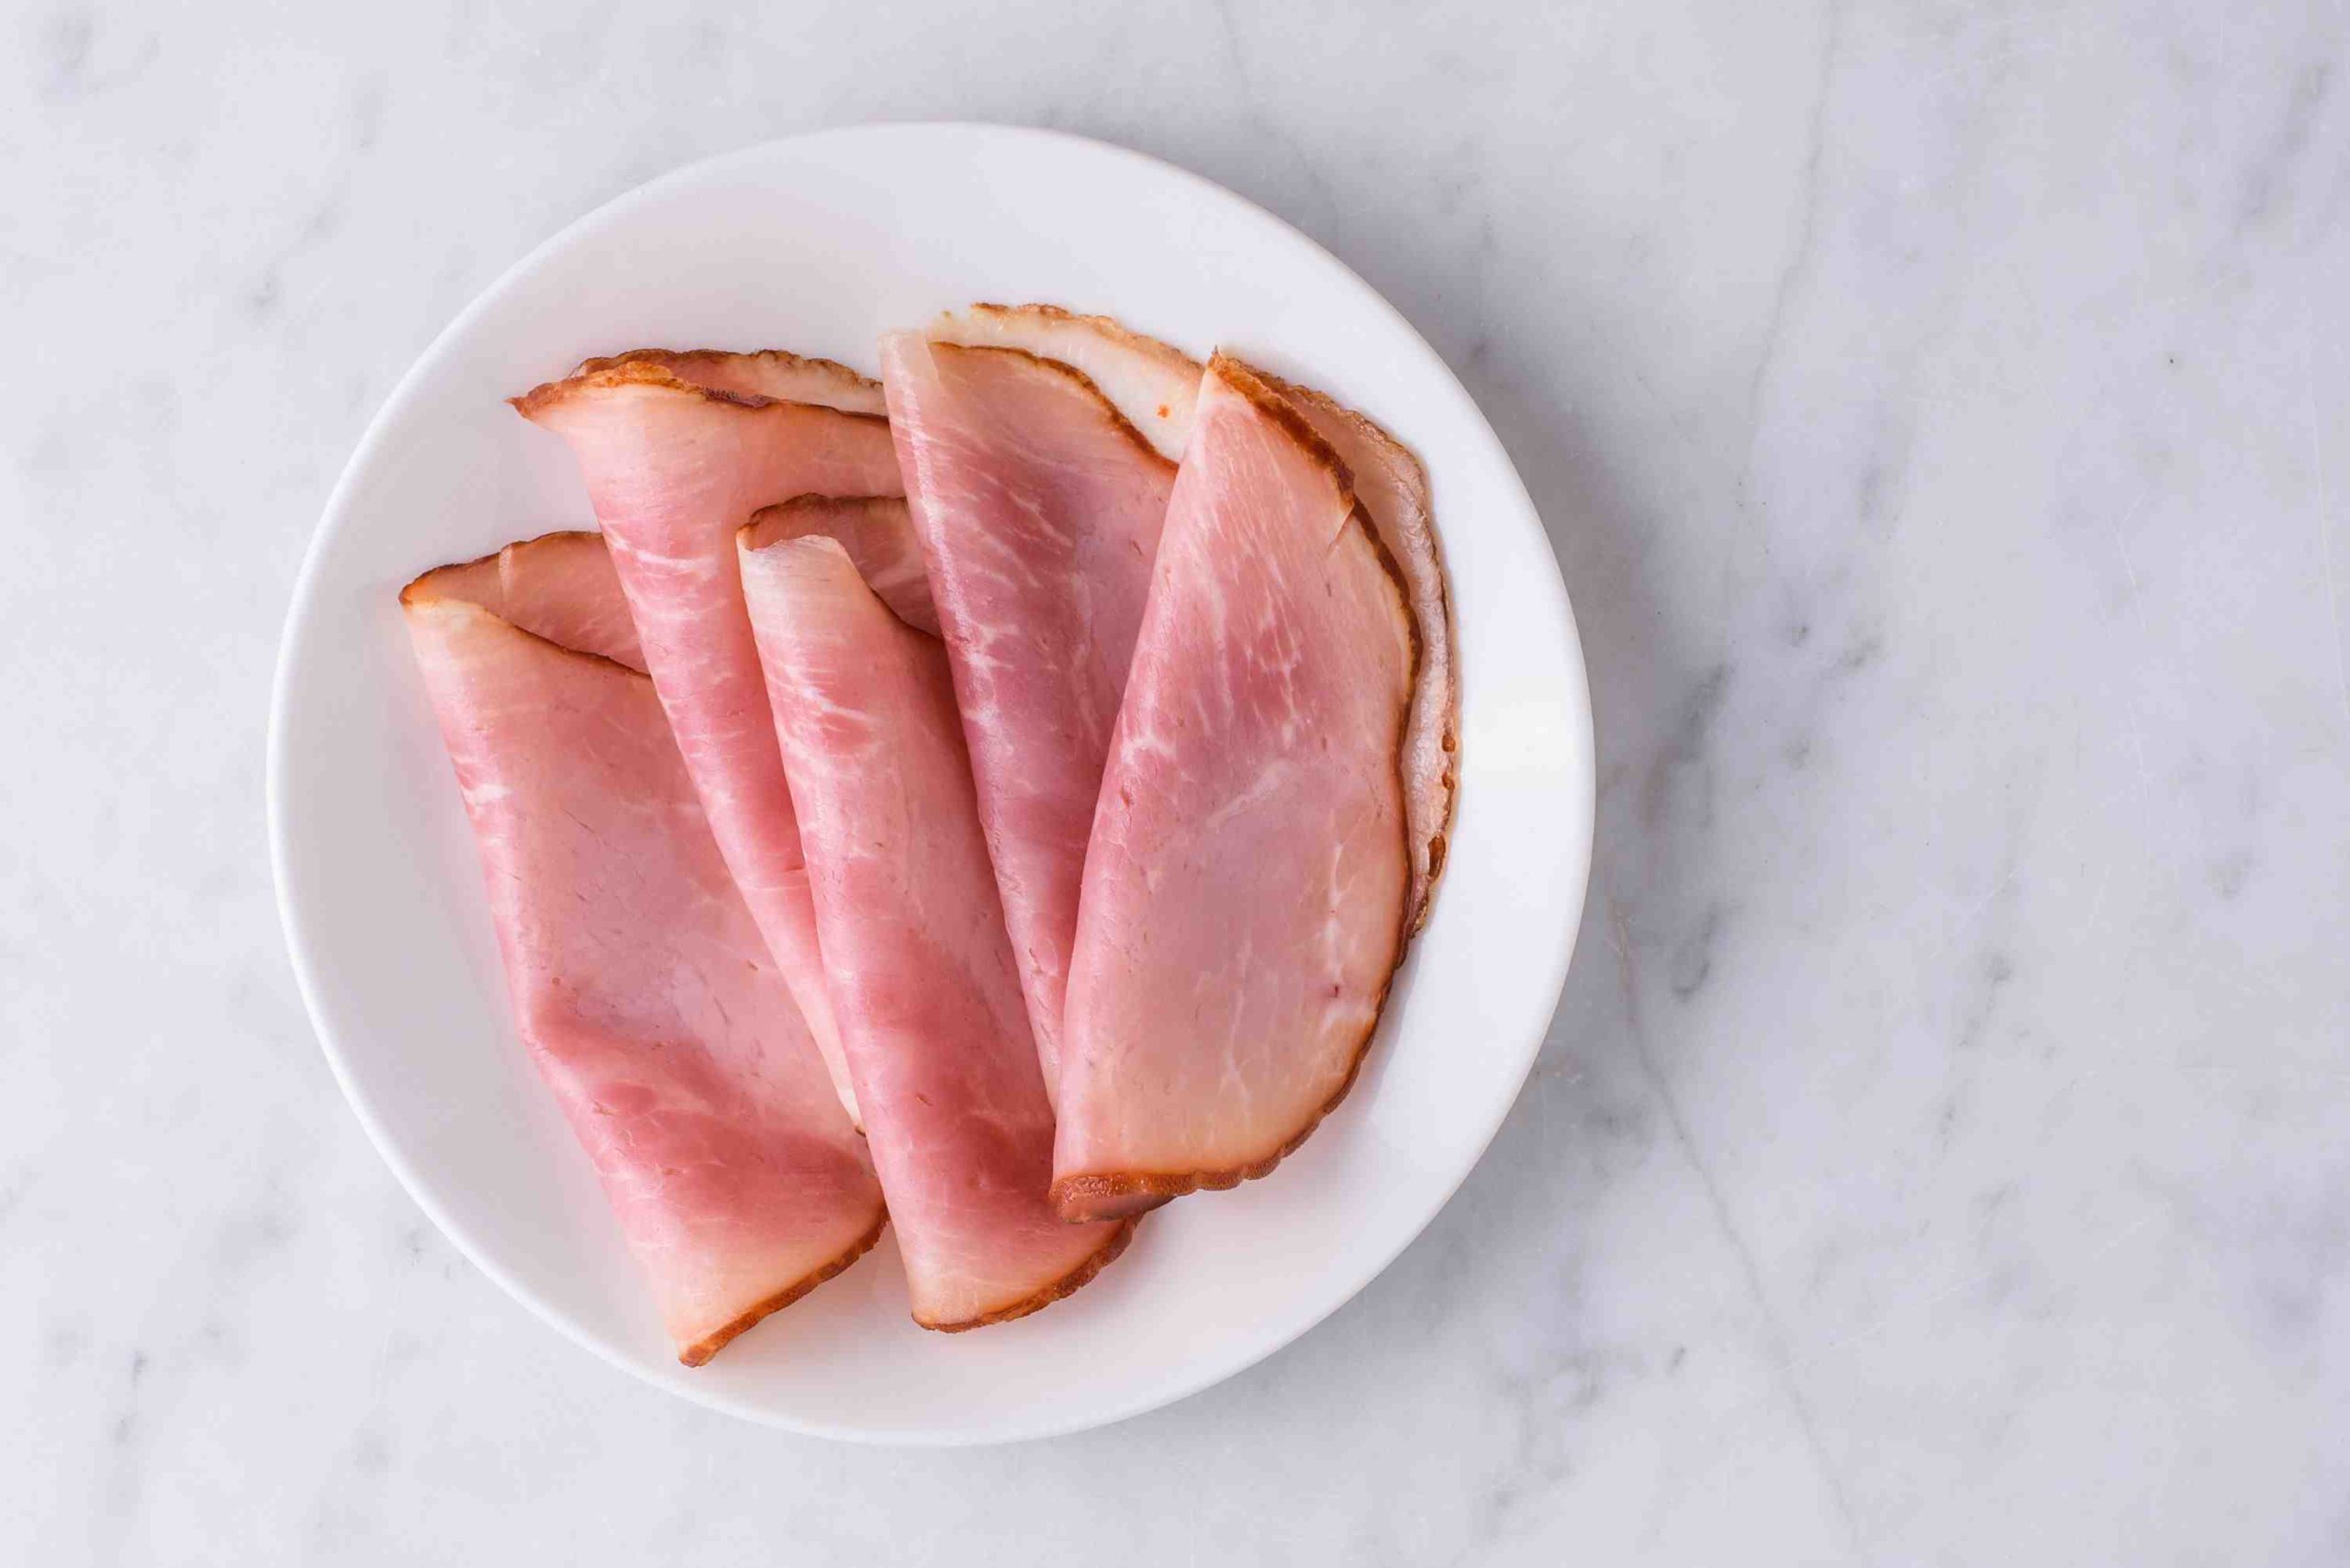 What is the healthiest deli meat brand?